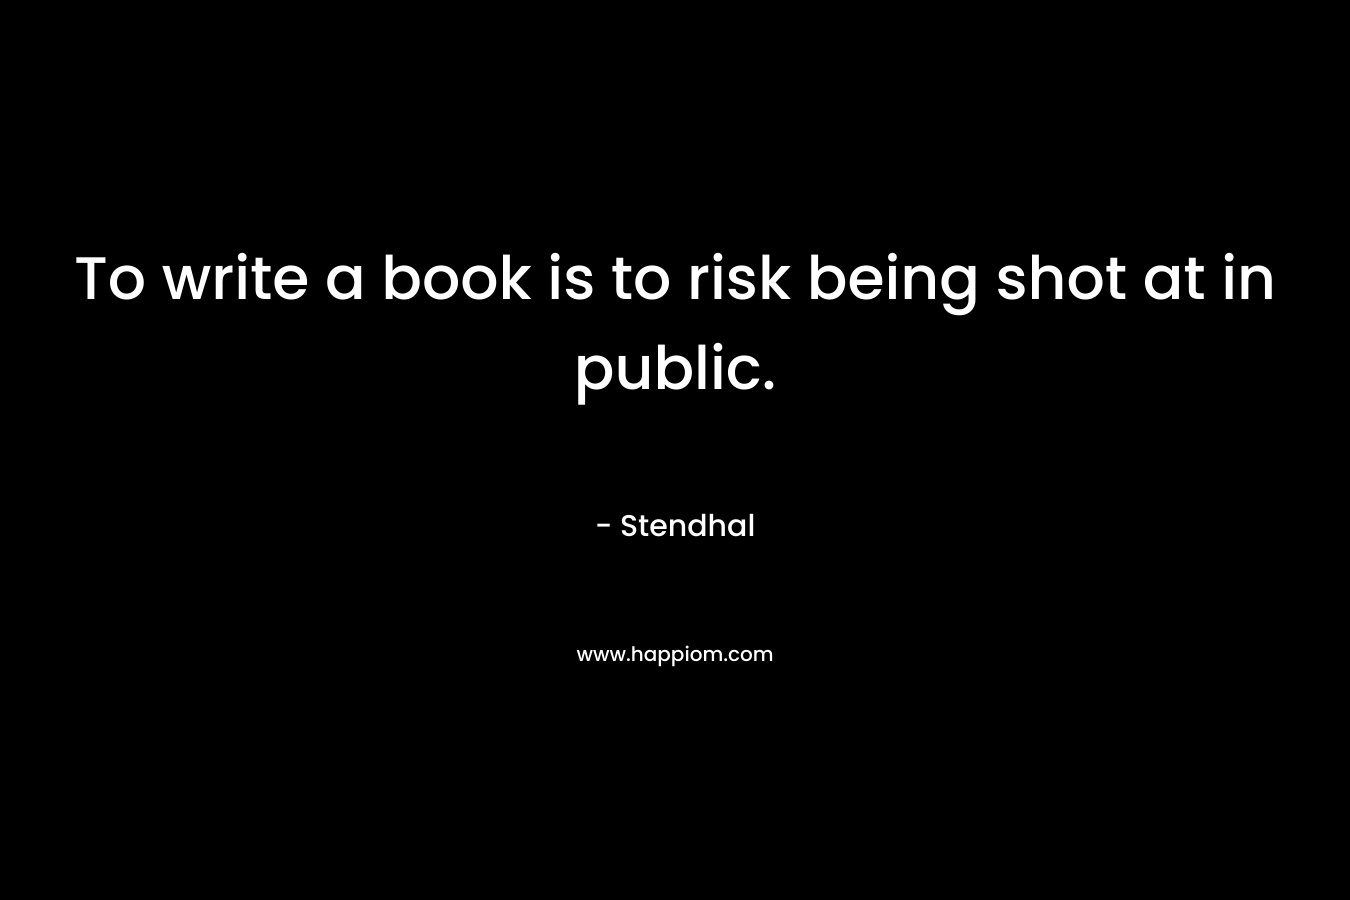 To write a book is to risk being shot at in public. – Stendhal